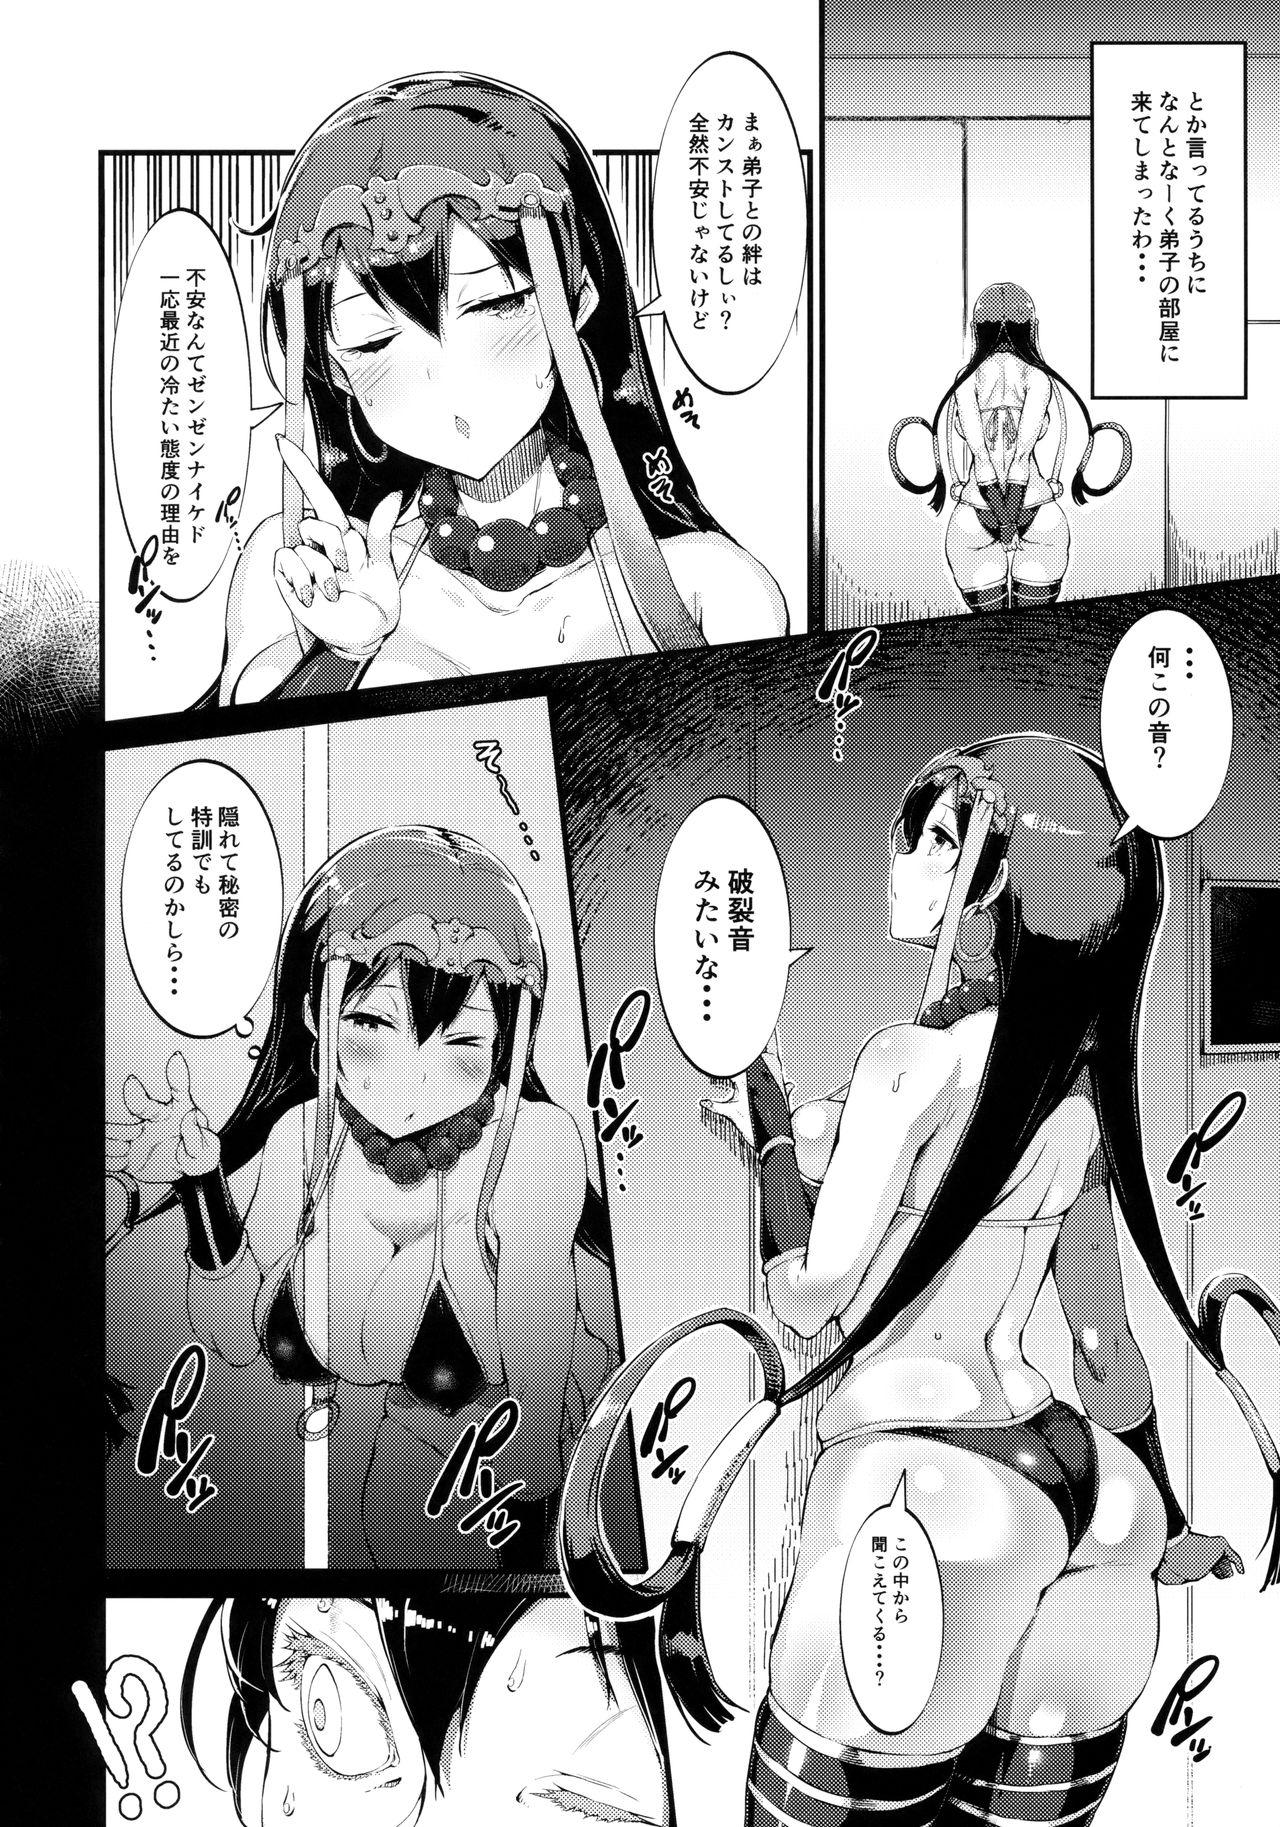 Mamadas S&N - Fate grand order Asstomouth - Page 5